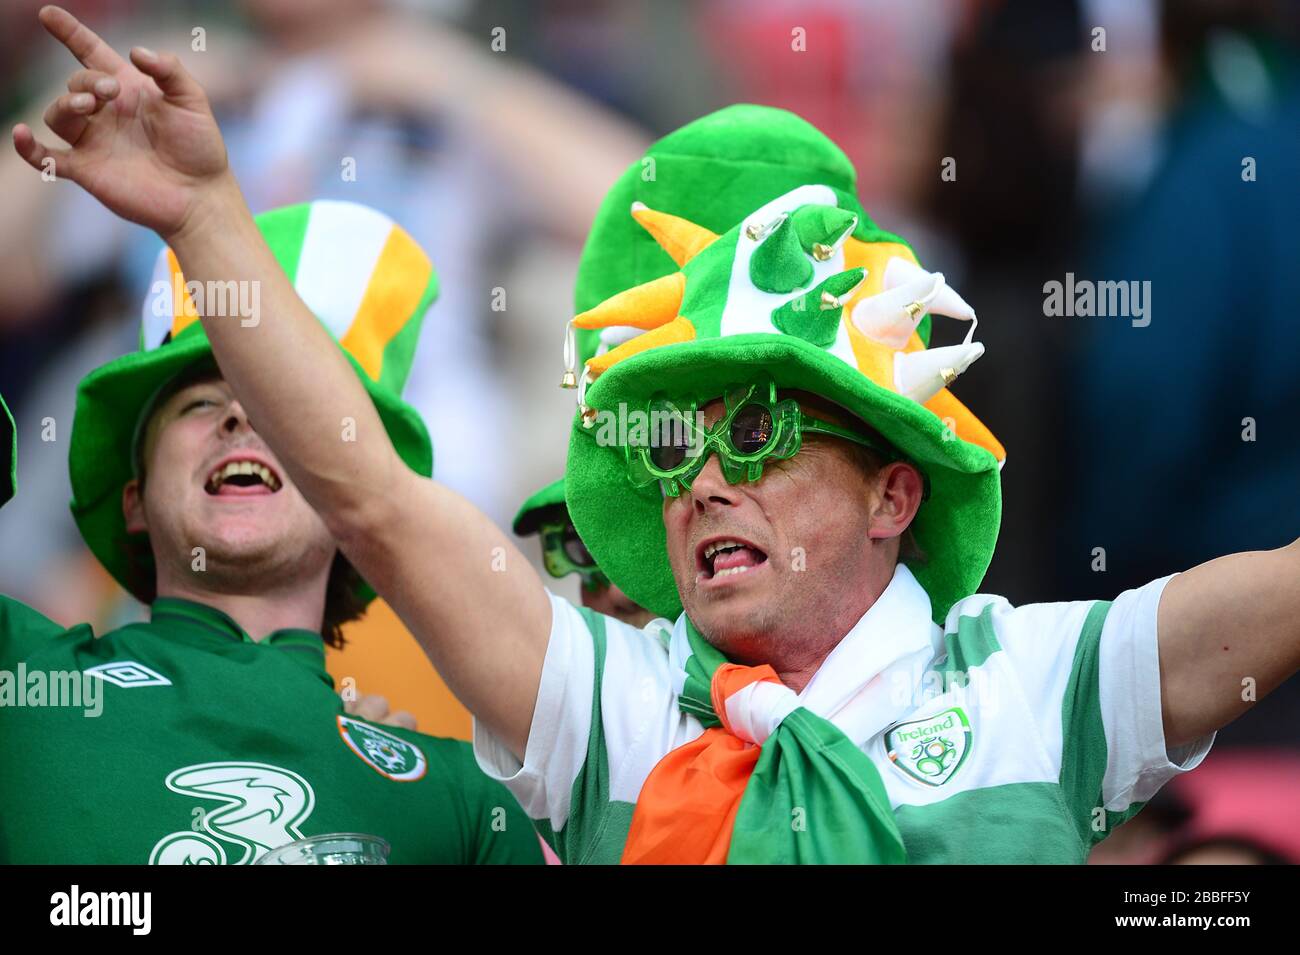 A Republic of Ireland fan wearing a jester hat and comedy glasses in the stands Stock Photo